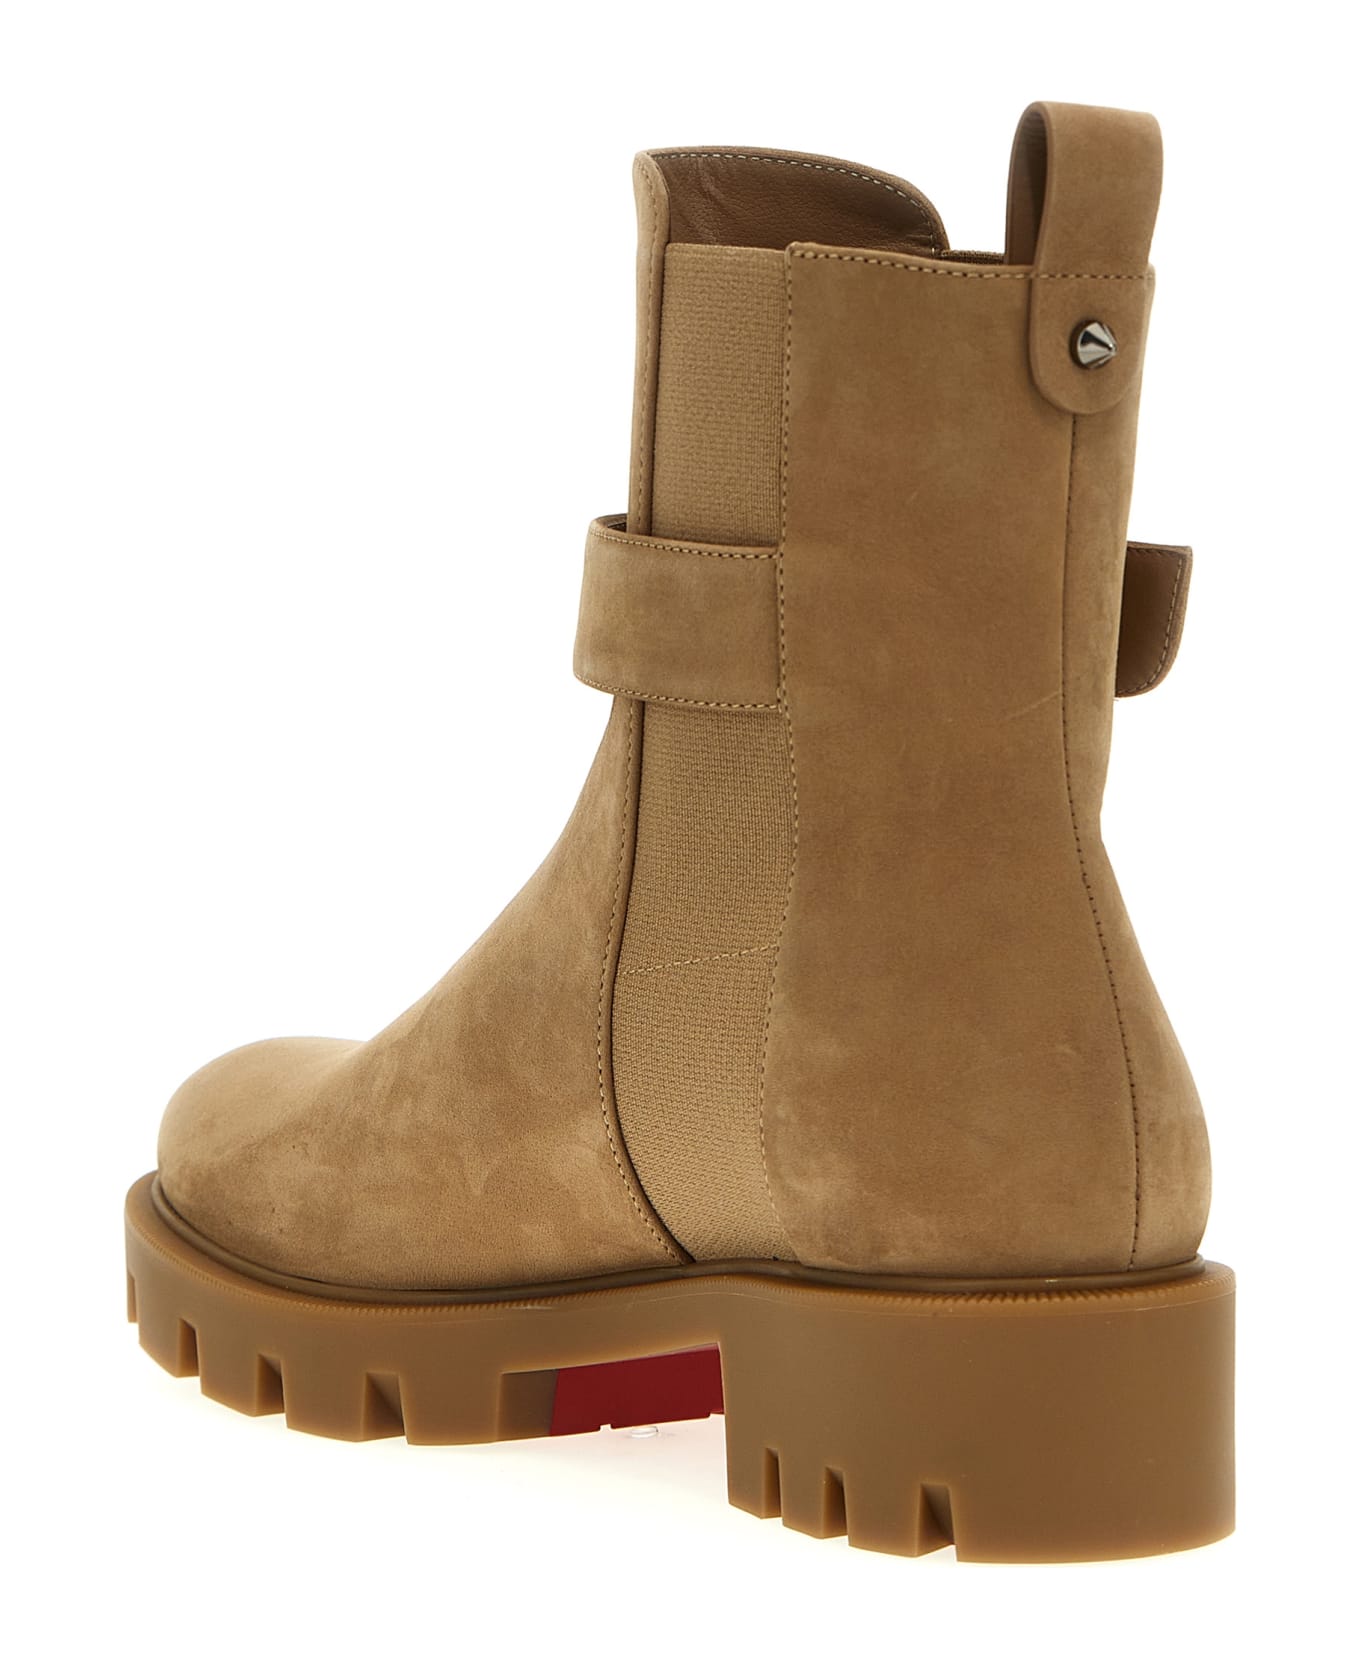 Christian Louboutin 'cl' Ankle Boots - Beige